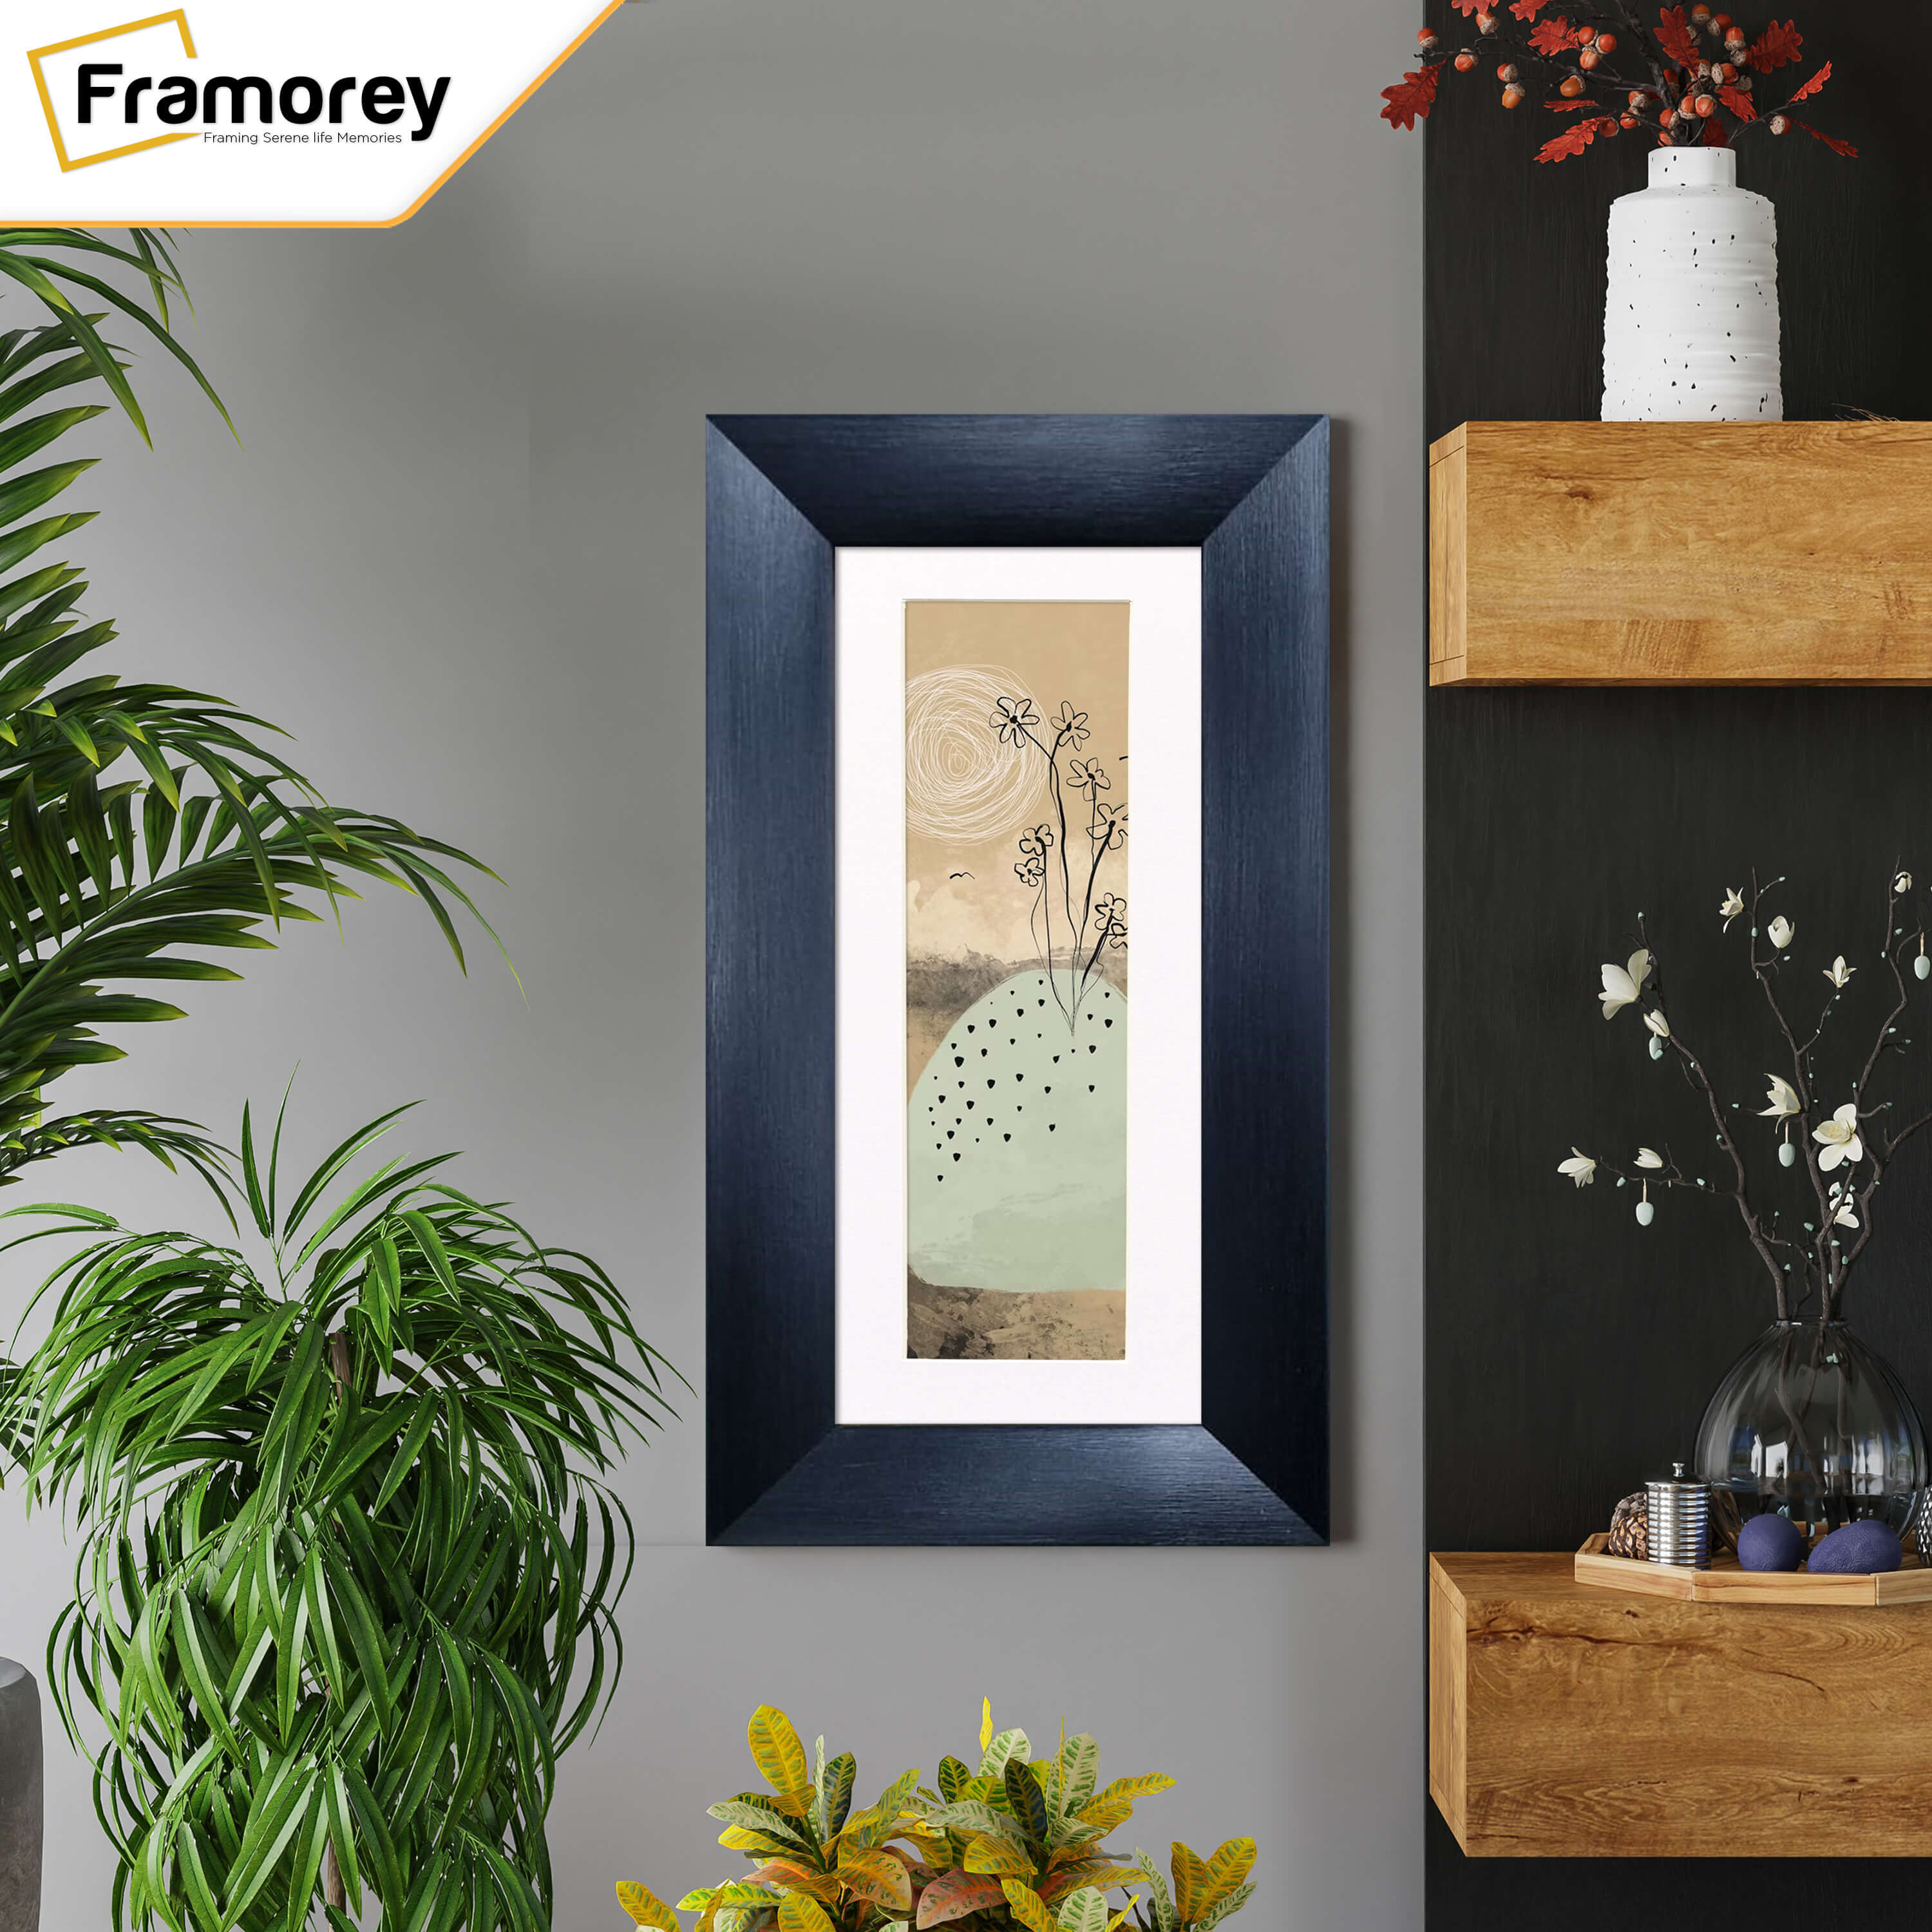 Panoramic Size Brushed Black Engraved Frames Handmade Poster Frames With White Mount